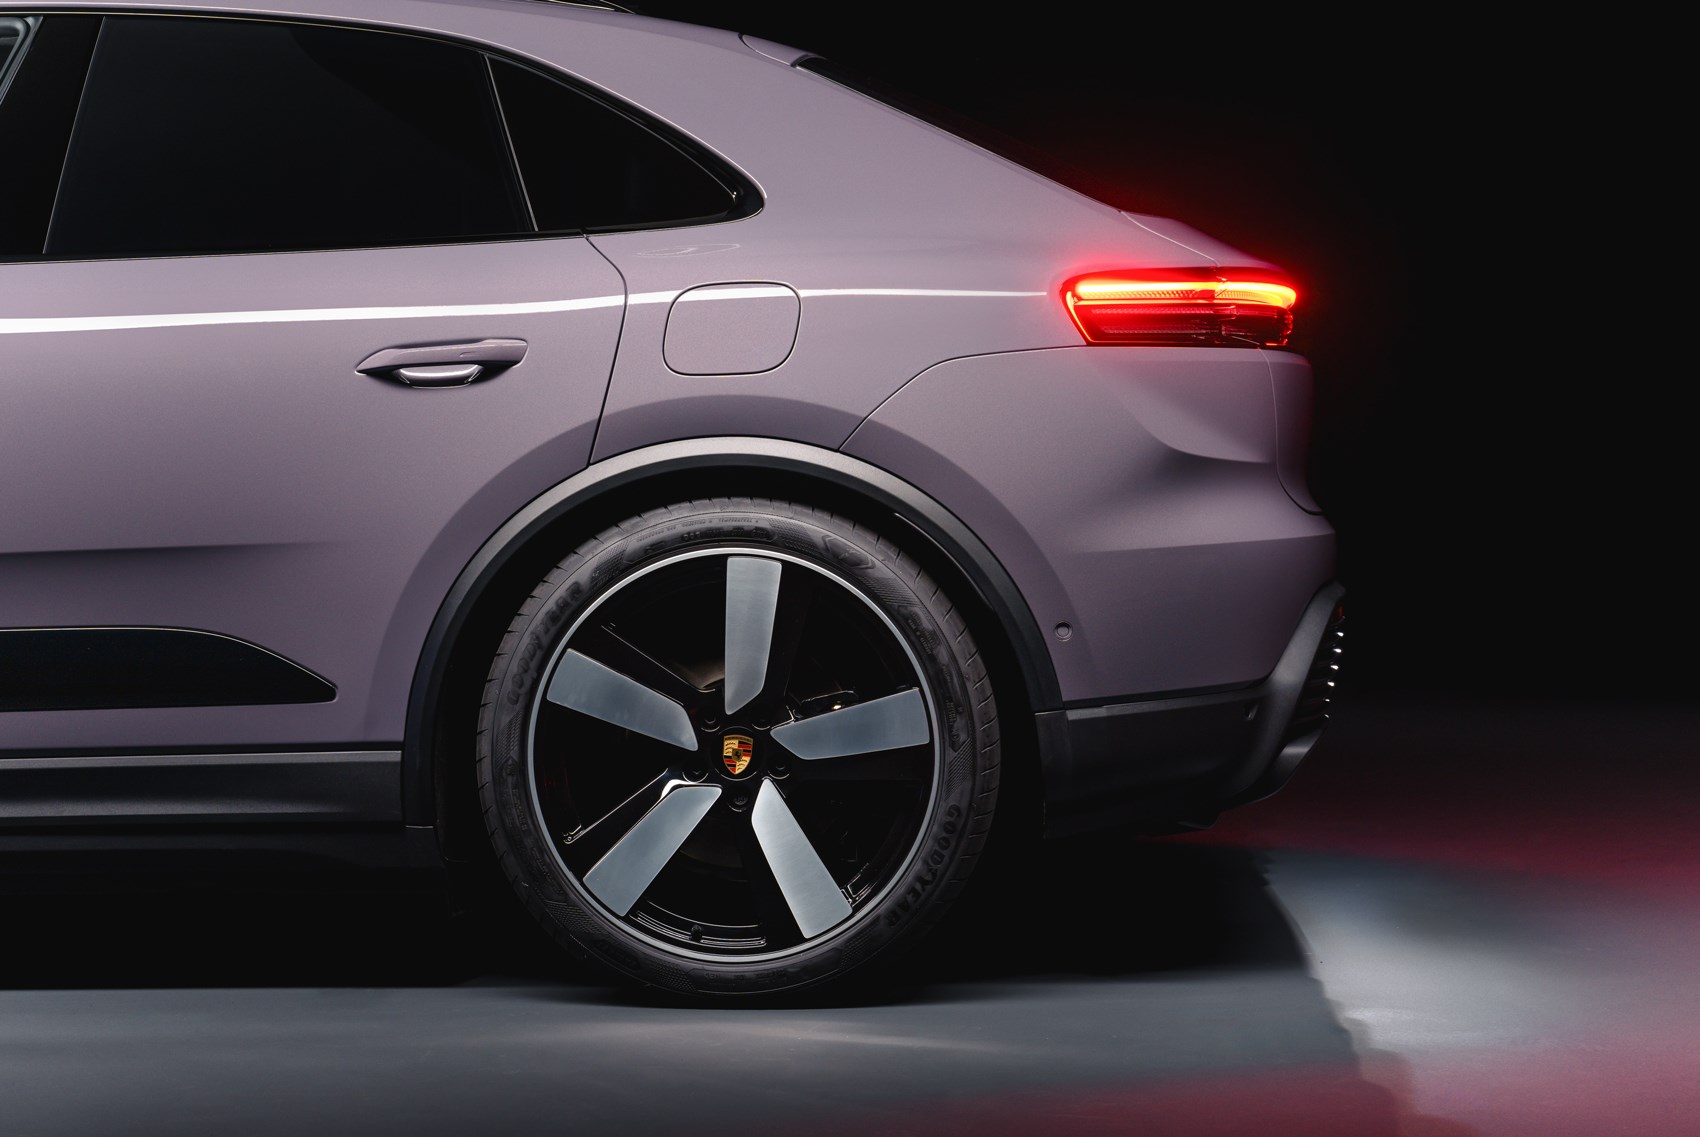 New electric Porsche Macan officially revealed: SUV bestseller takes the EV  plunge